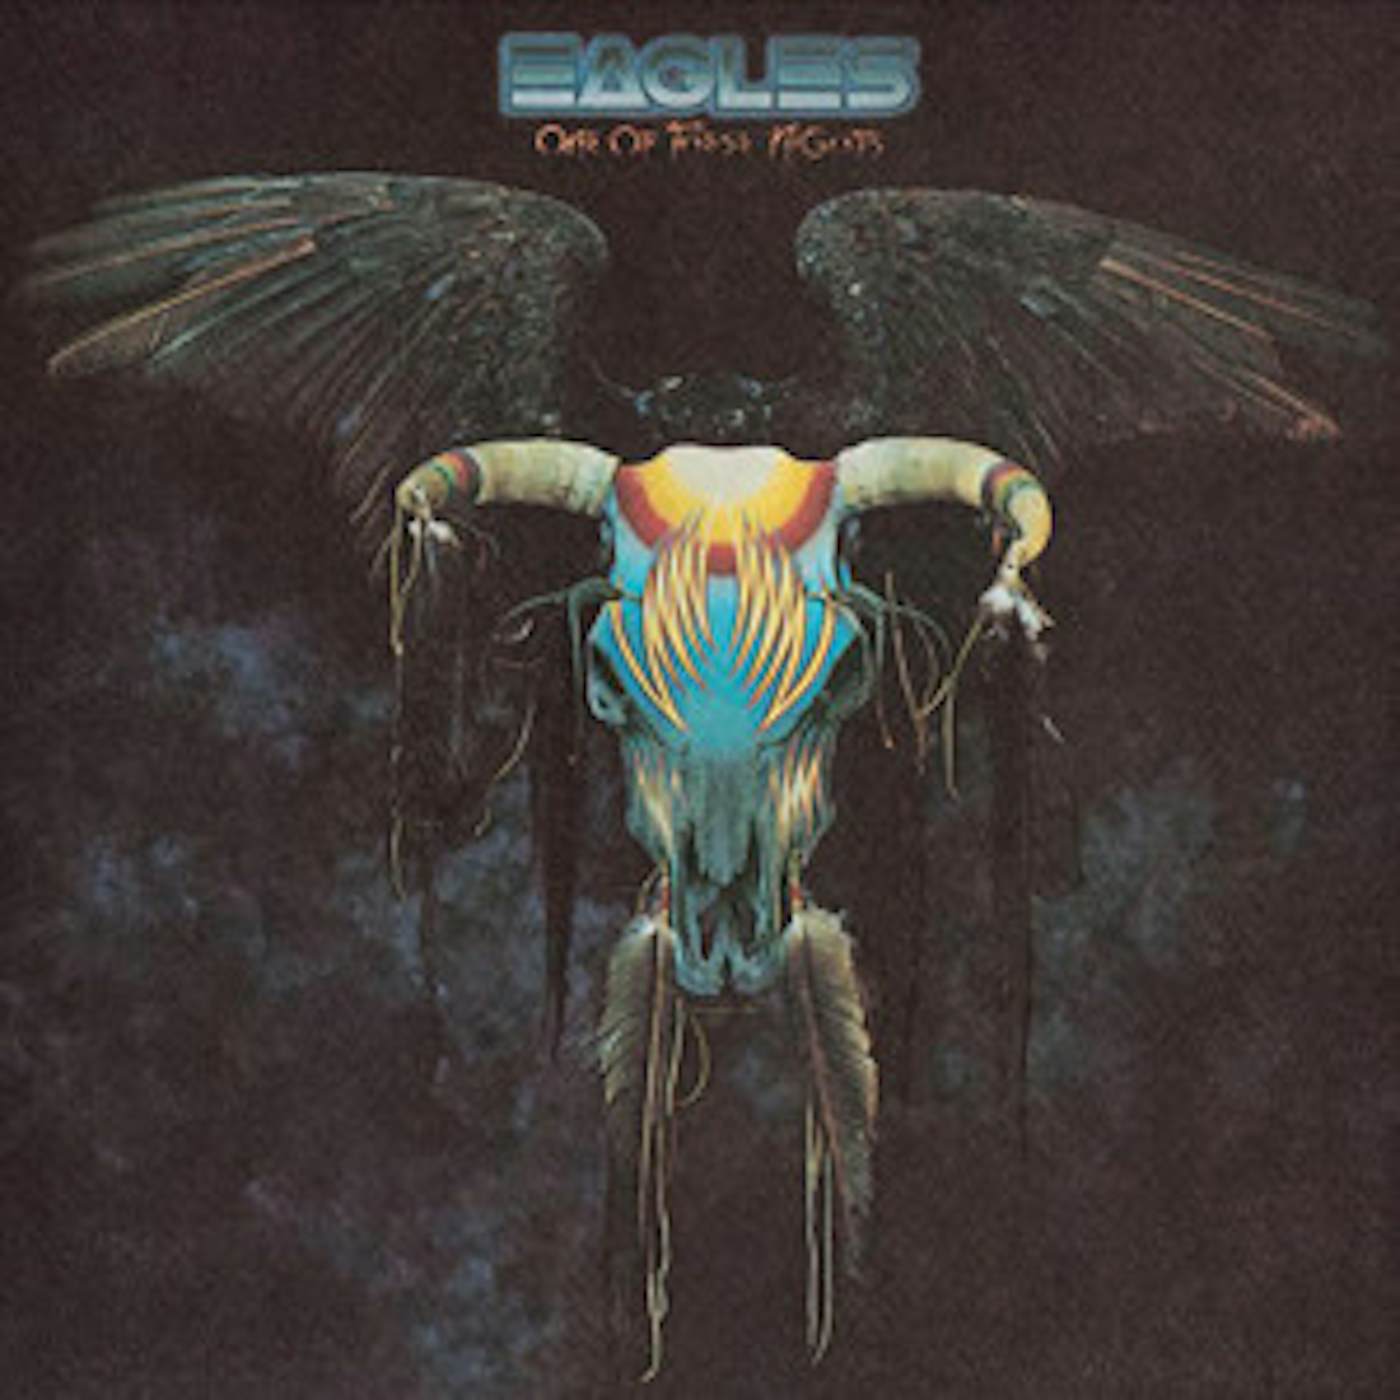 Eagles One Of These Nights Vinyl Record